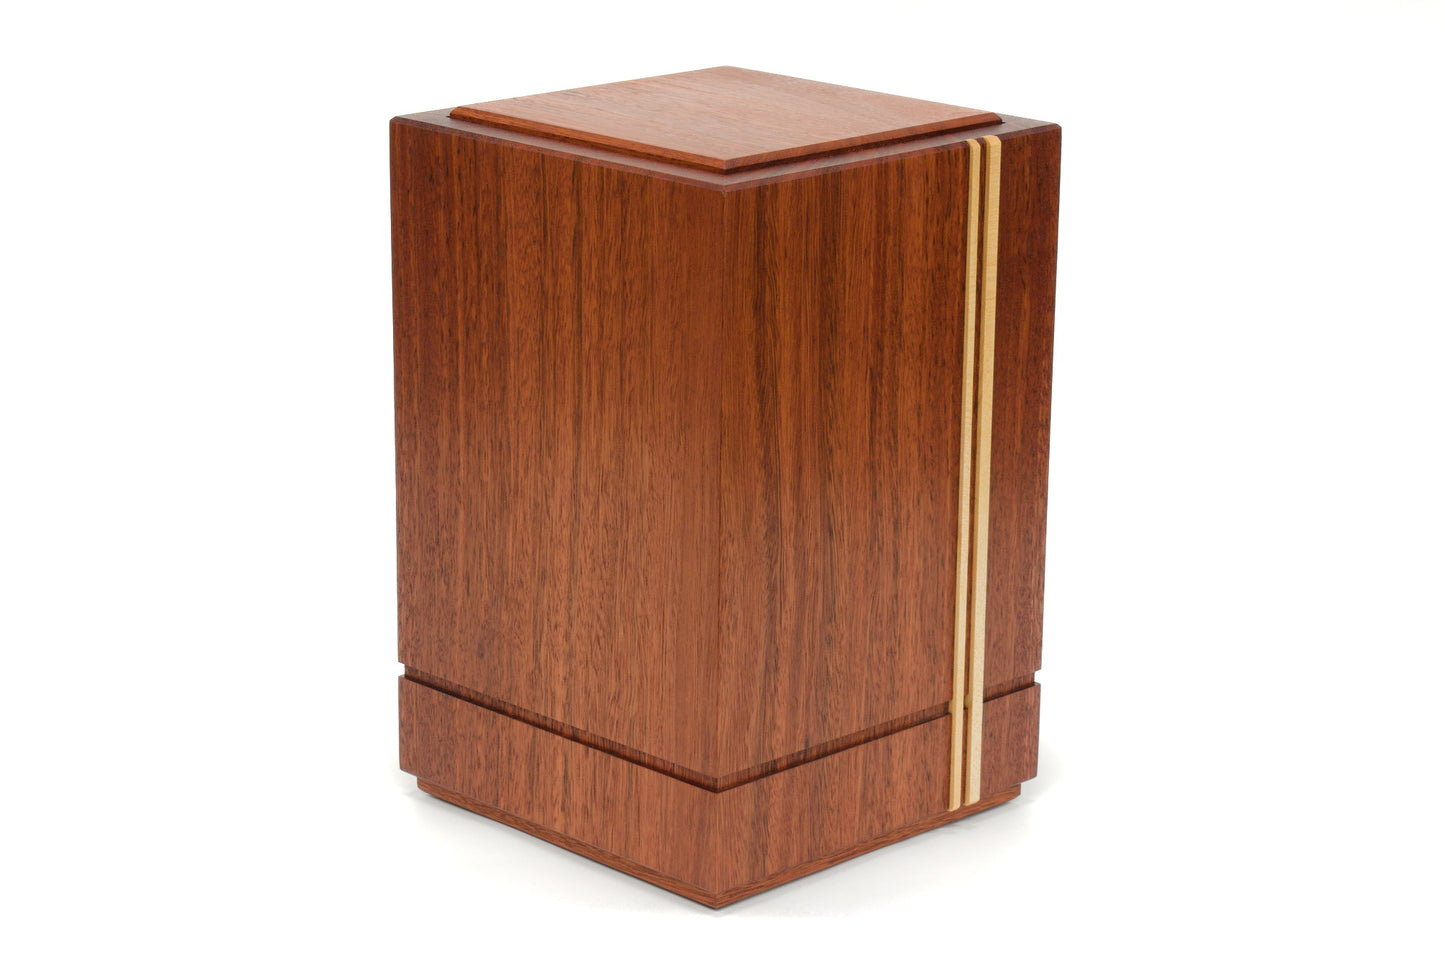 Wooden cremation urn handcrafted from Jarrah